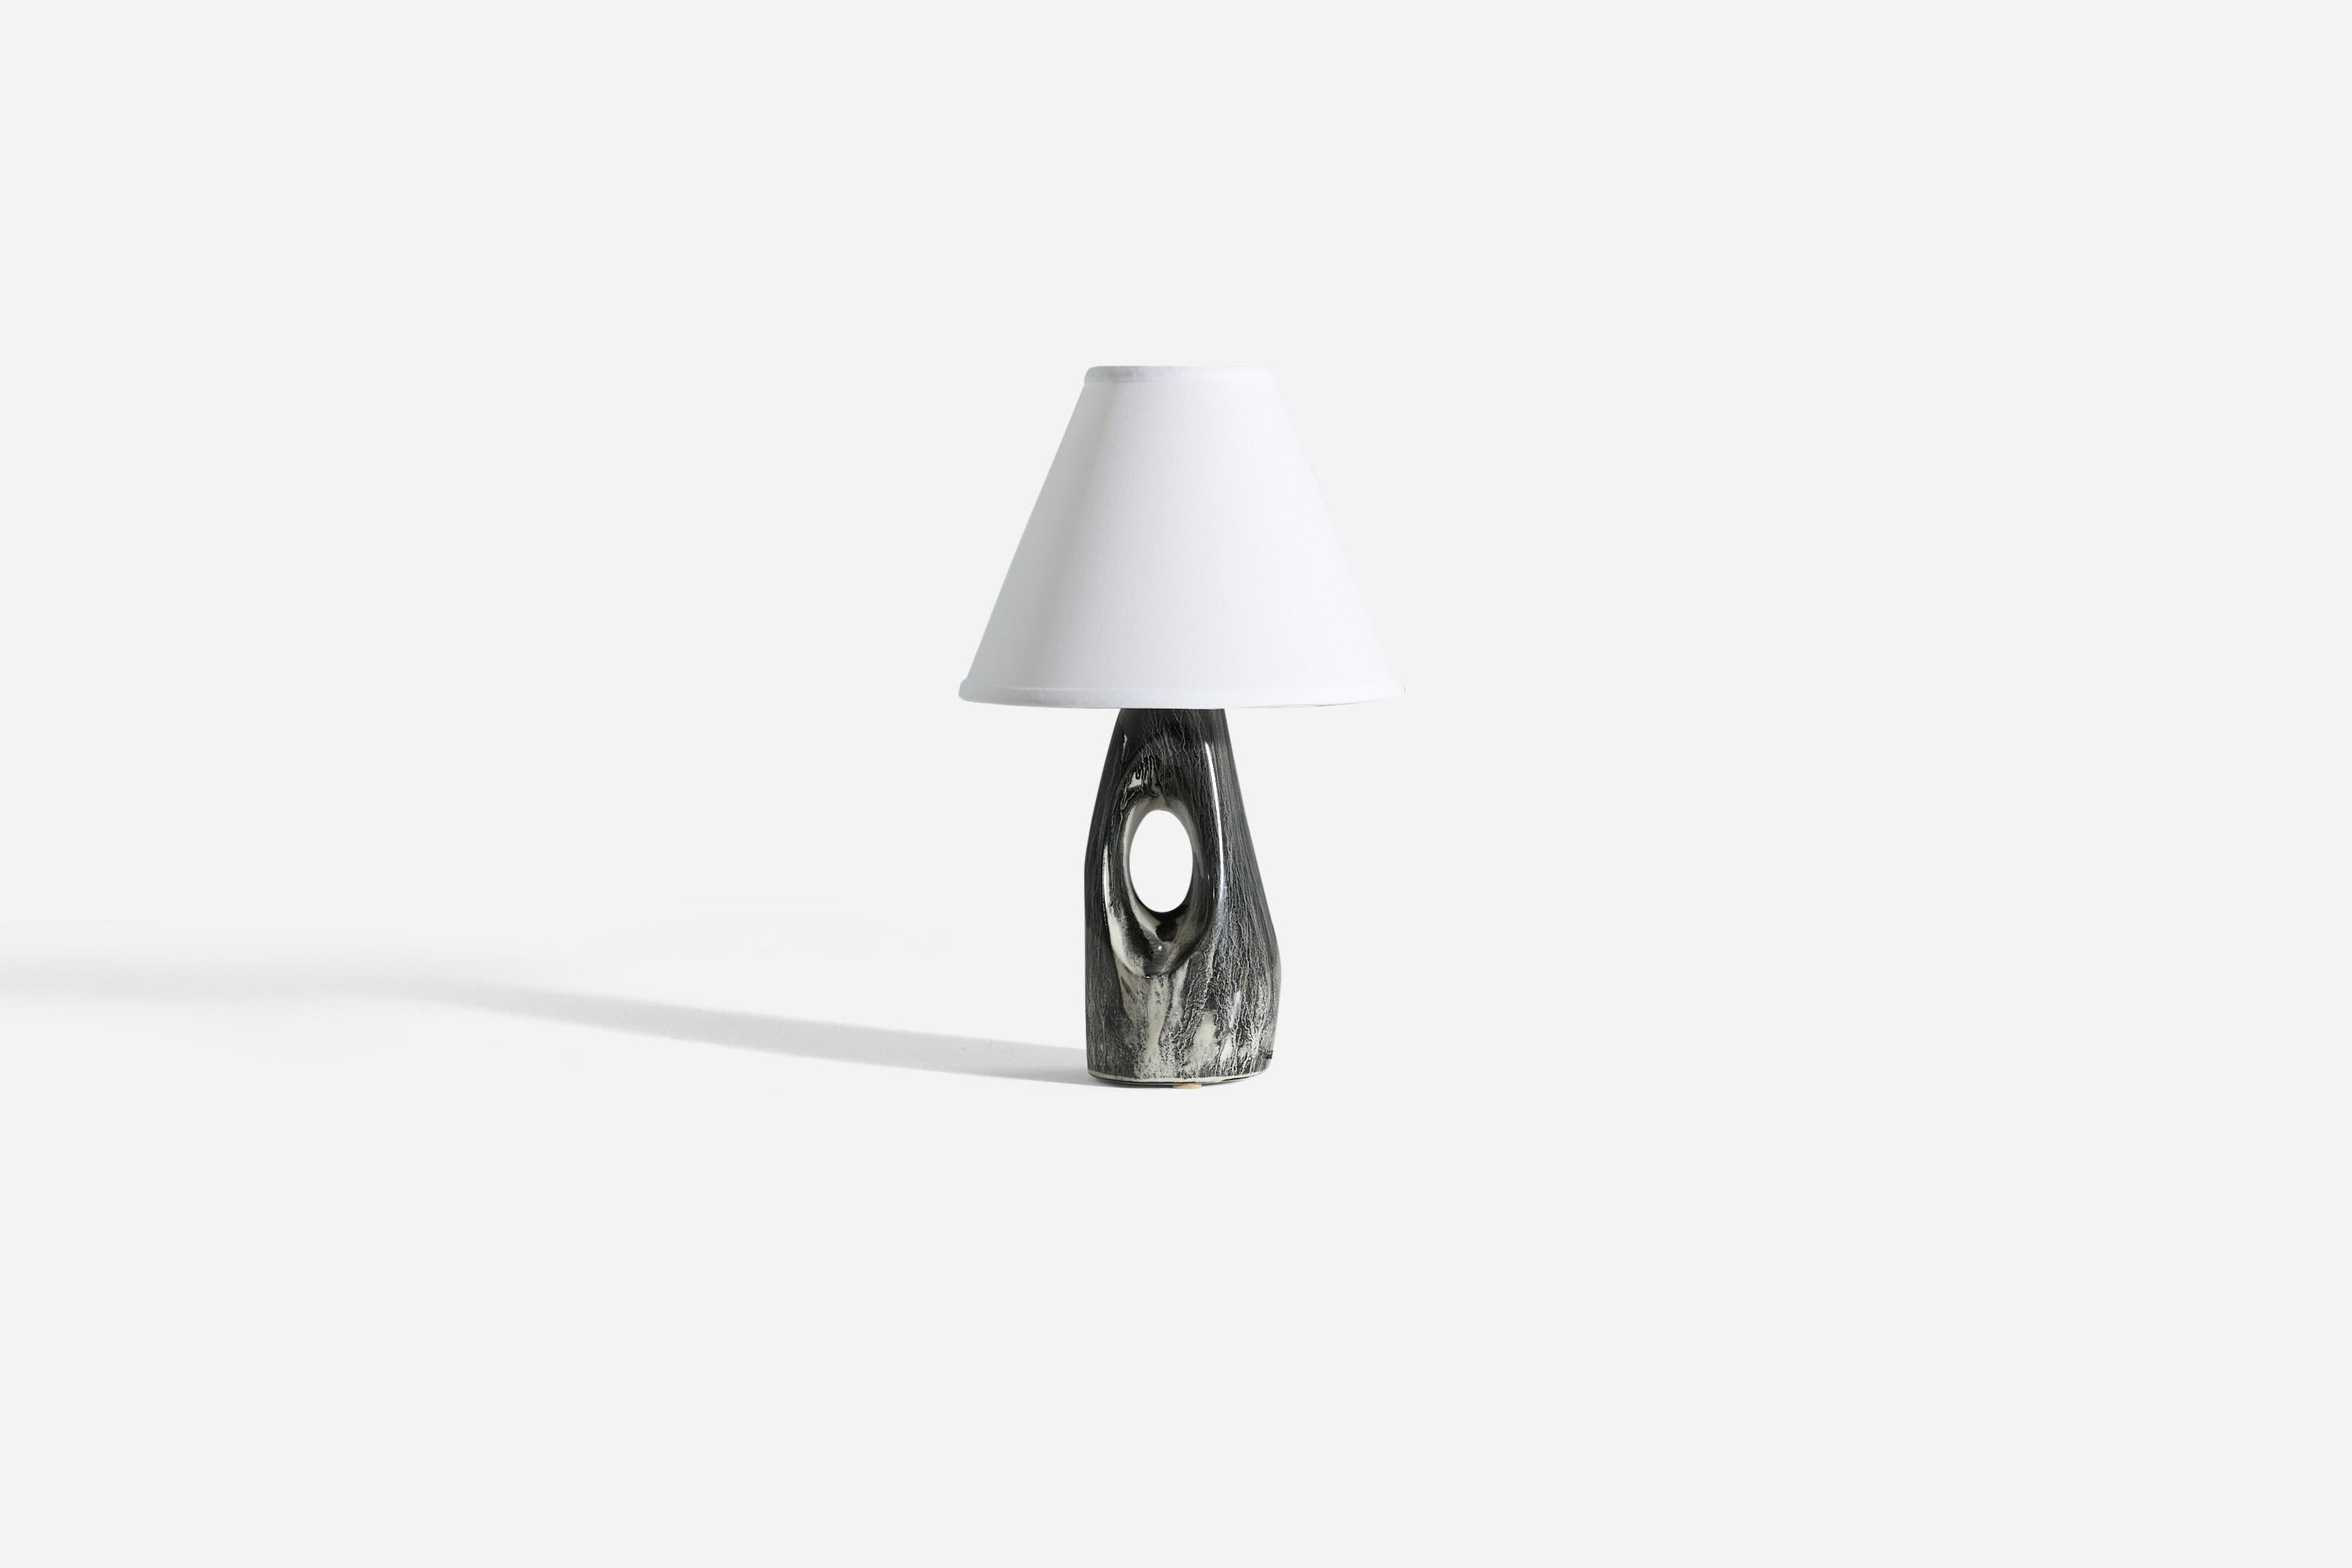 A ceramic table lamp, designed and produced by a British designer, United Kingdom, 1960s.

Glaze features a grey color with hints of white.

Sold without lampshade. 
Dimensions of Lamp (inches) : 12.25 x 4.0625 x 4 (H x W x D)
Dimensions Shade